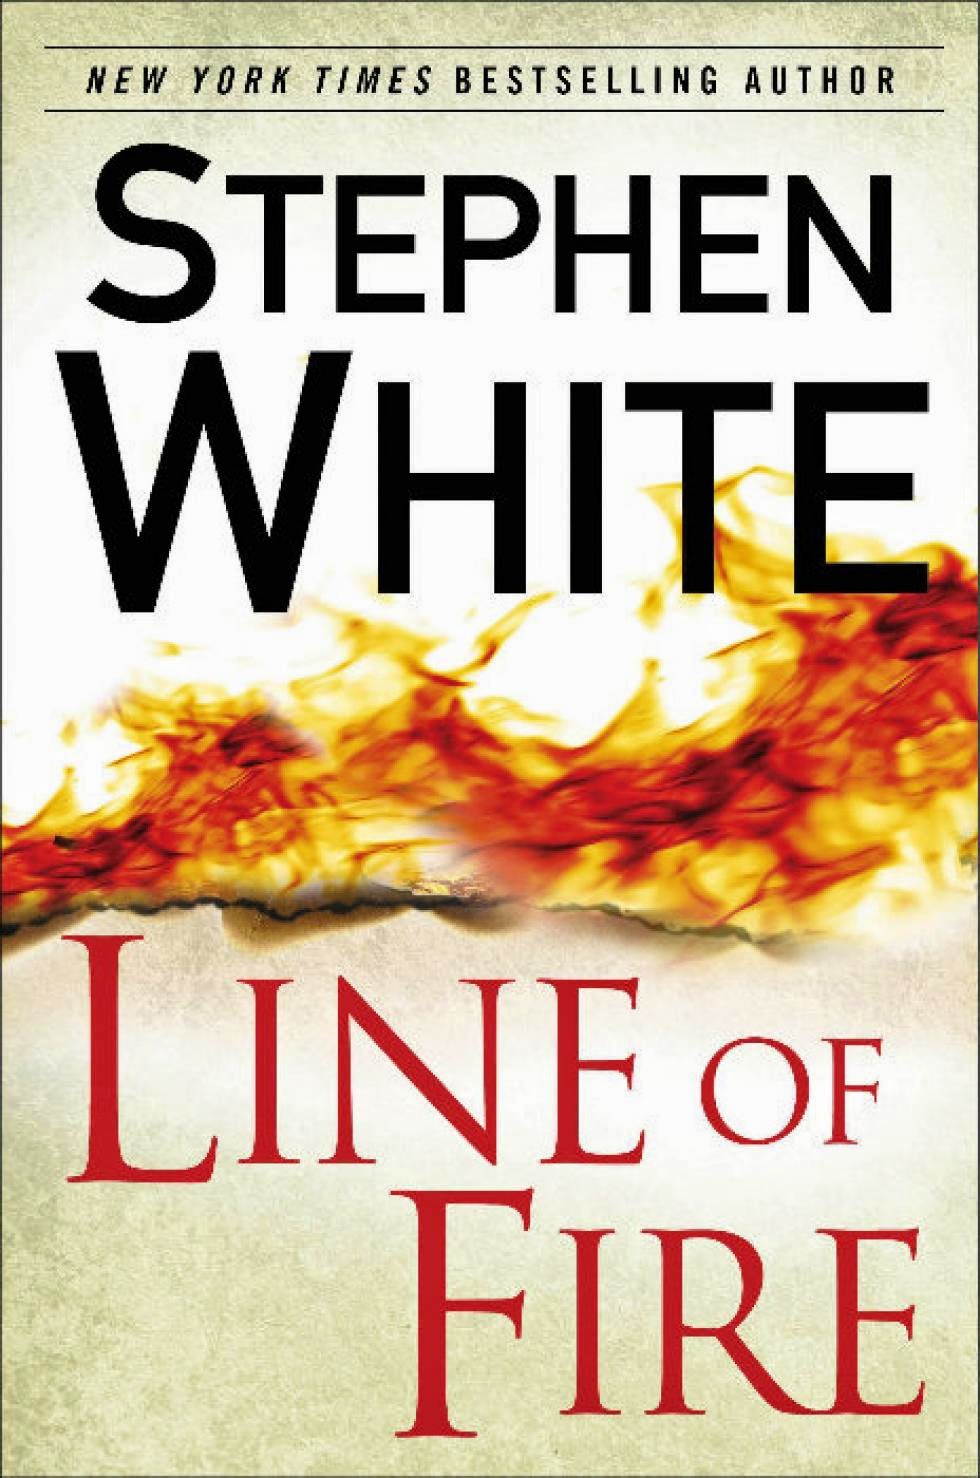 http://discover.halifaxpubliclibraries.ca/?q=title:line%20of%20fire%20author:white